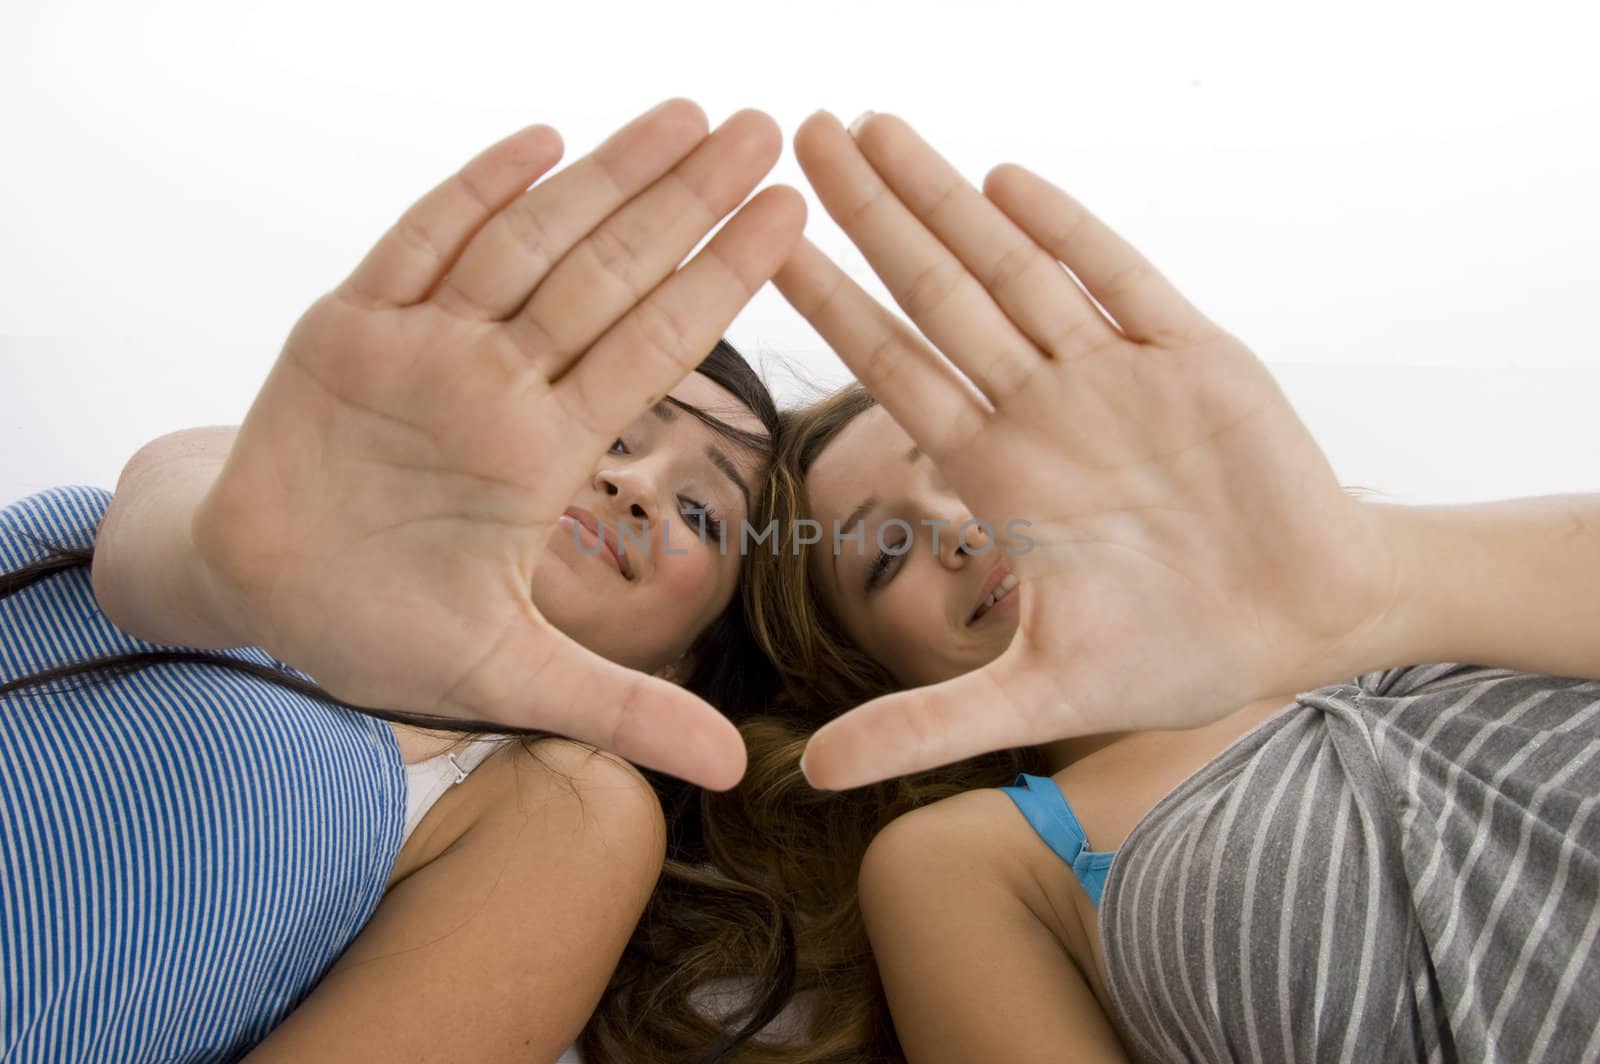 laying girls showing hand gesture on  an isolated white background 